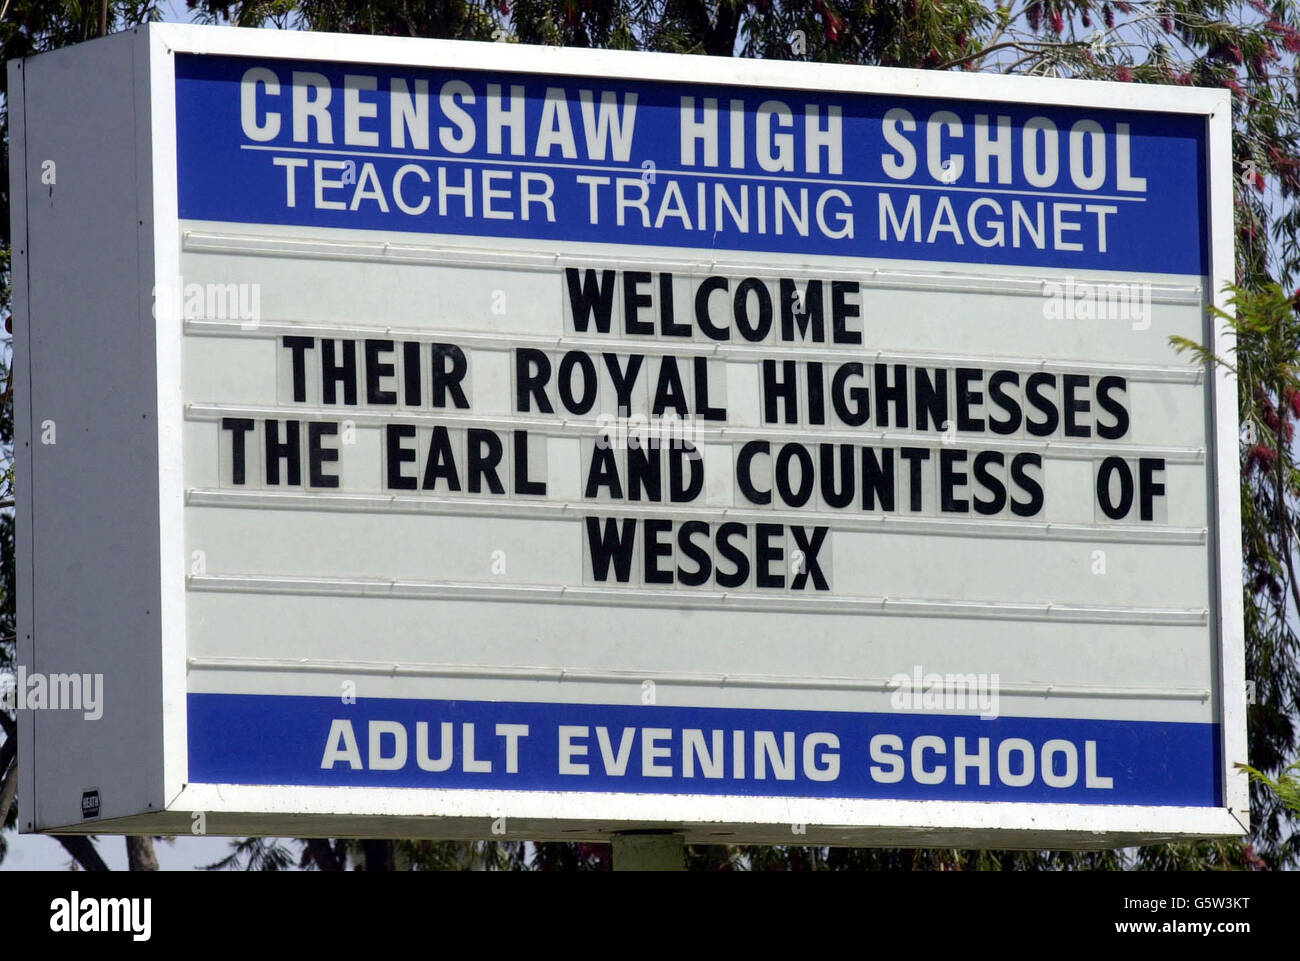 The sign welcoming the The Earl and Countess of Wessex to the Crenshaw High School in Los Angeles. During a visit to the school the Earl presented a cheque for $5,000 on behalf of the UK Foreign & Commonwealth Office to be used to purchase additional equipment for digital arts programs. Stock Photo